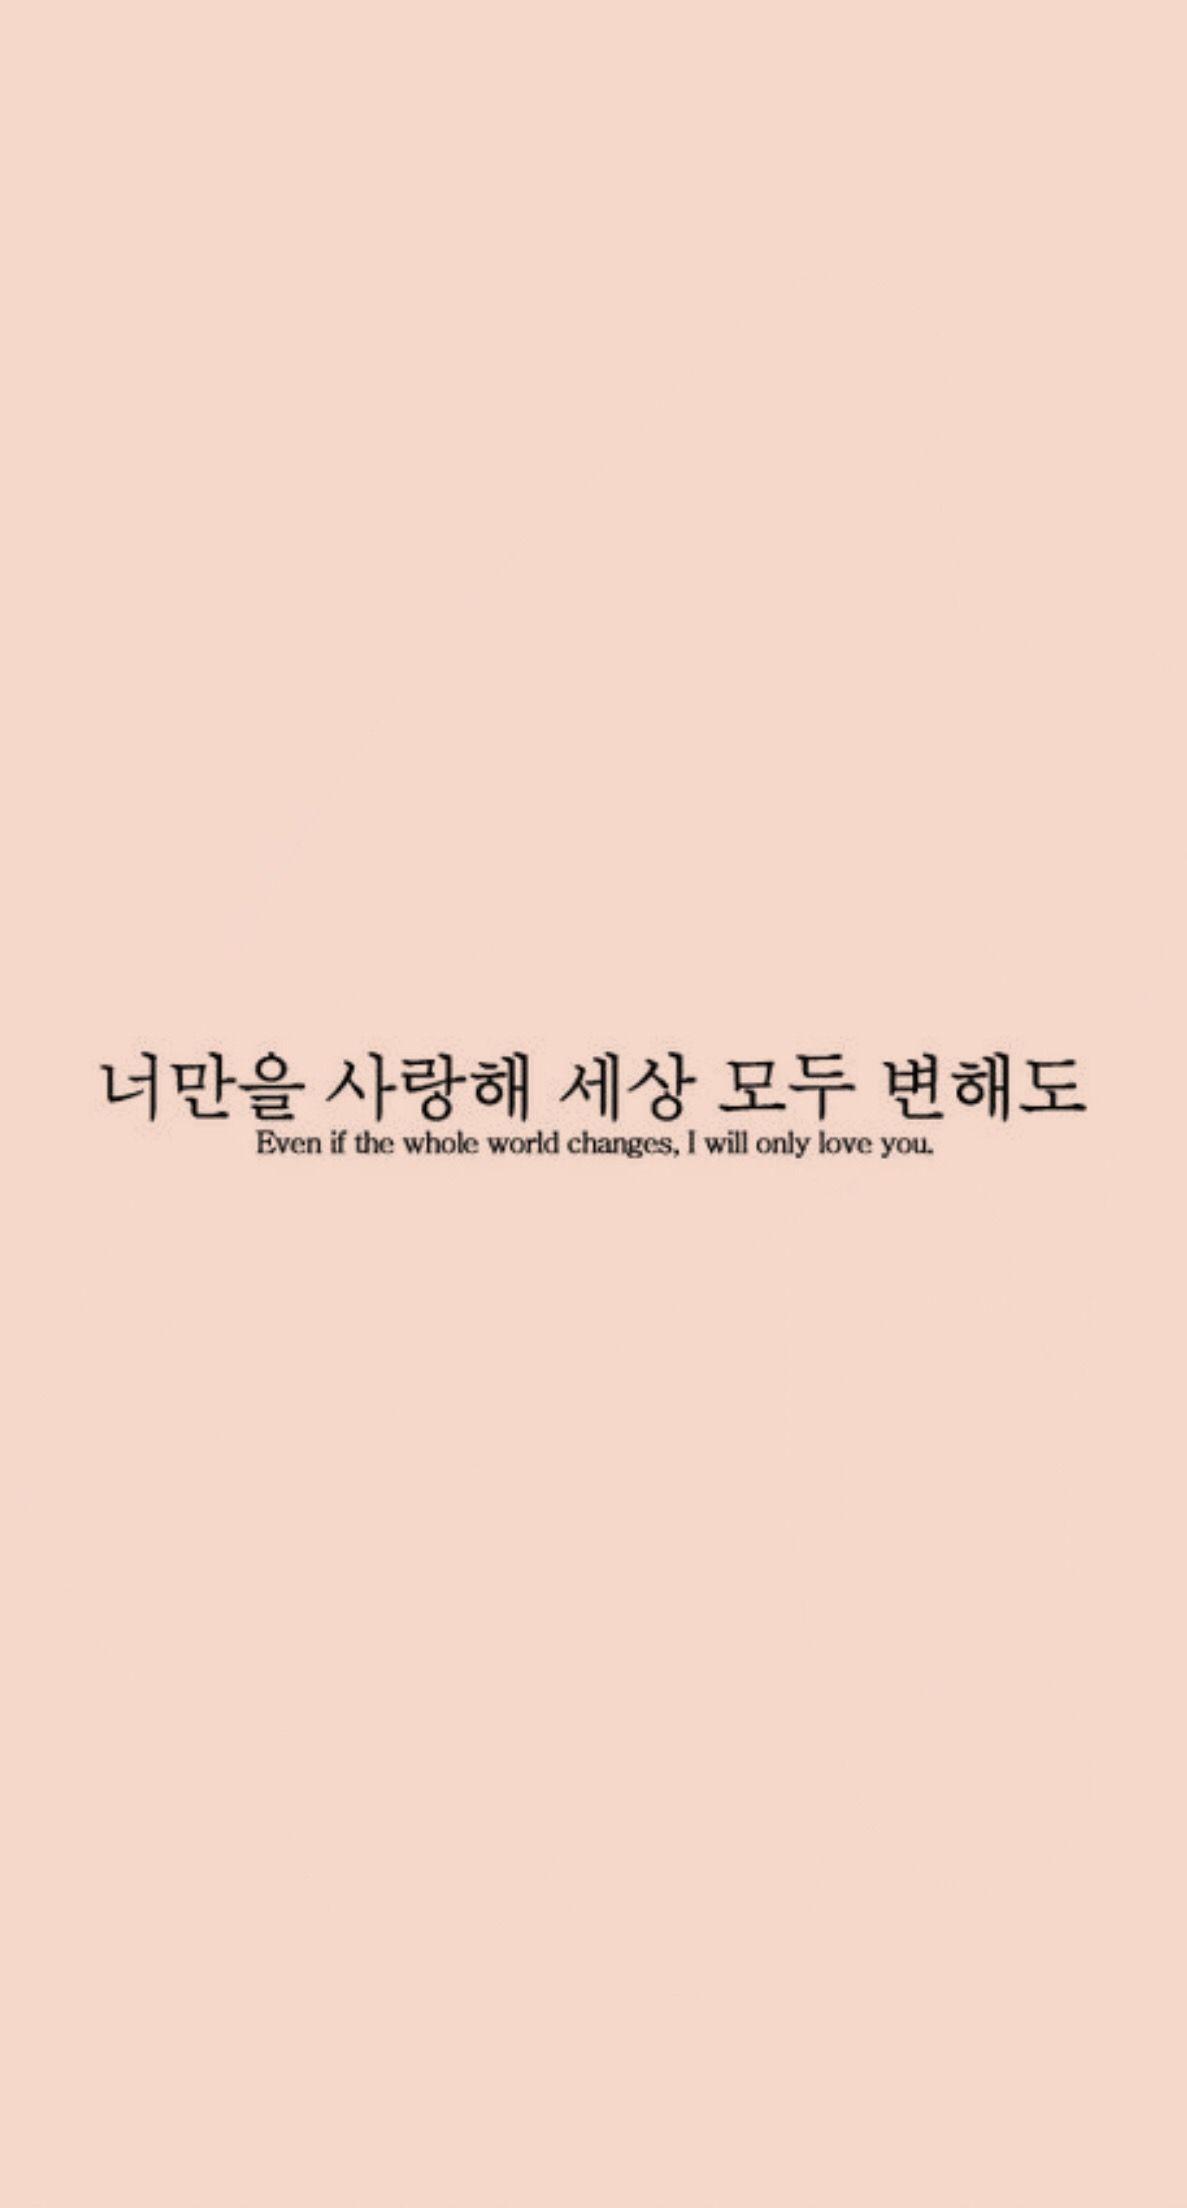 Even if the whole world changes, I will only love you. - Korean